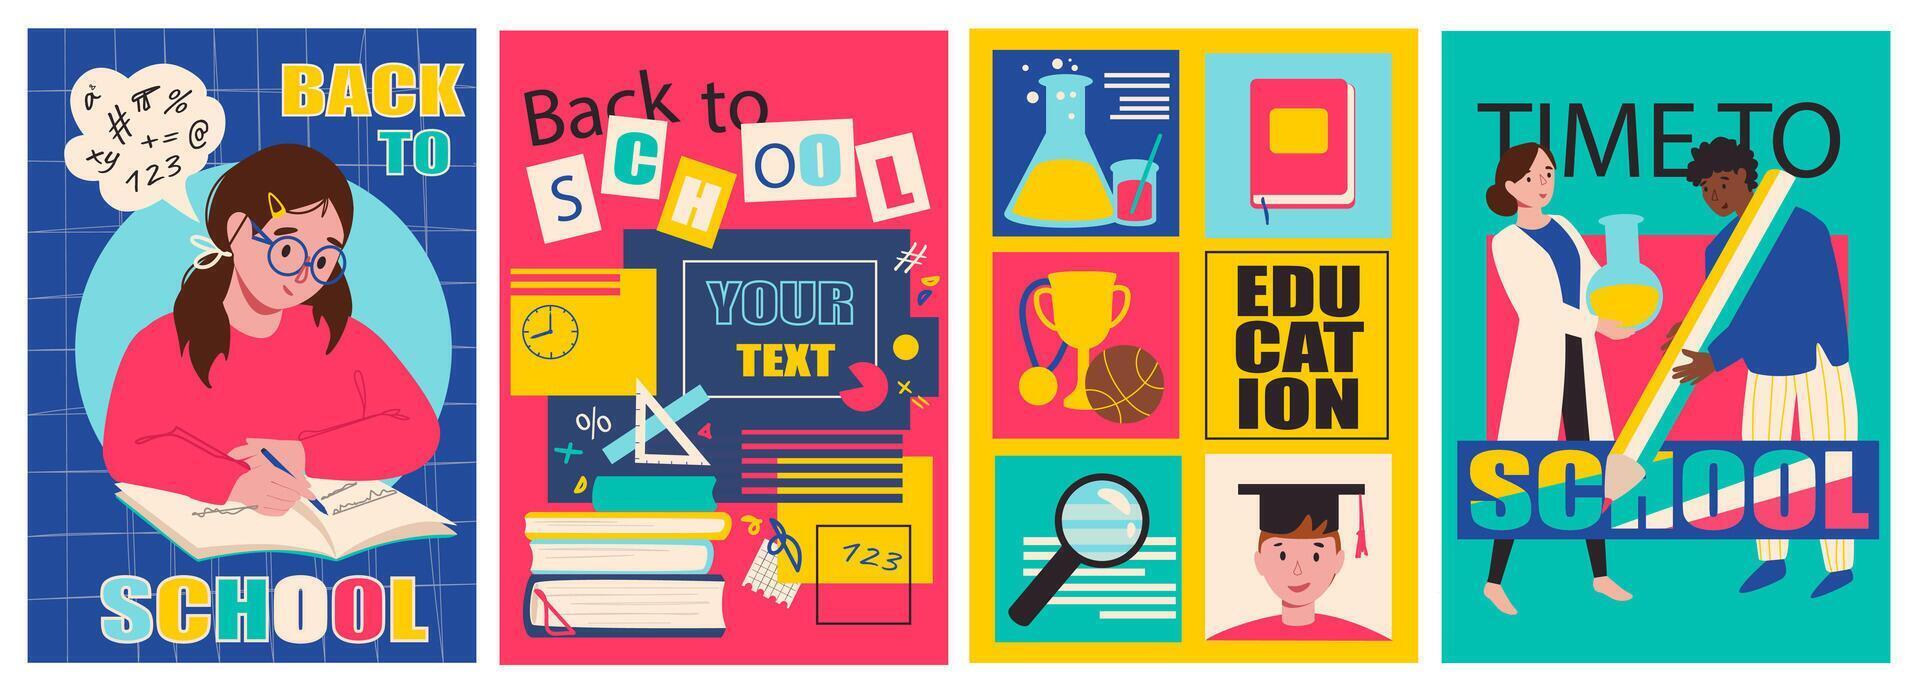 Back to school cover brochure set in trendy flat design. Poster templates with schoolgirl doing homework, books and stationery, different lessons and science, teacher and pupil. Vector illustration.